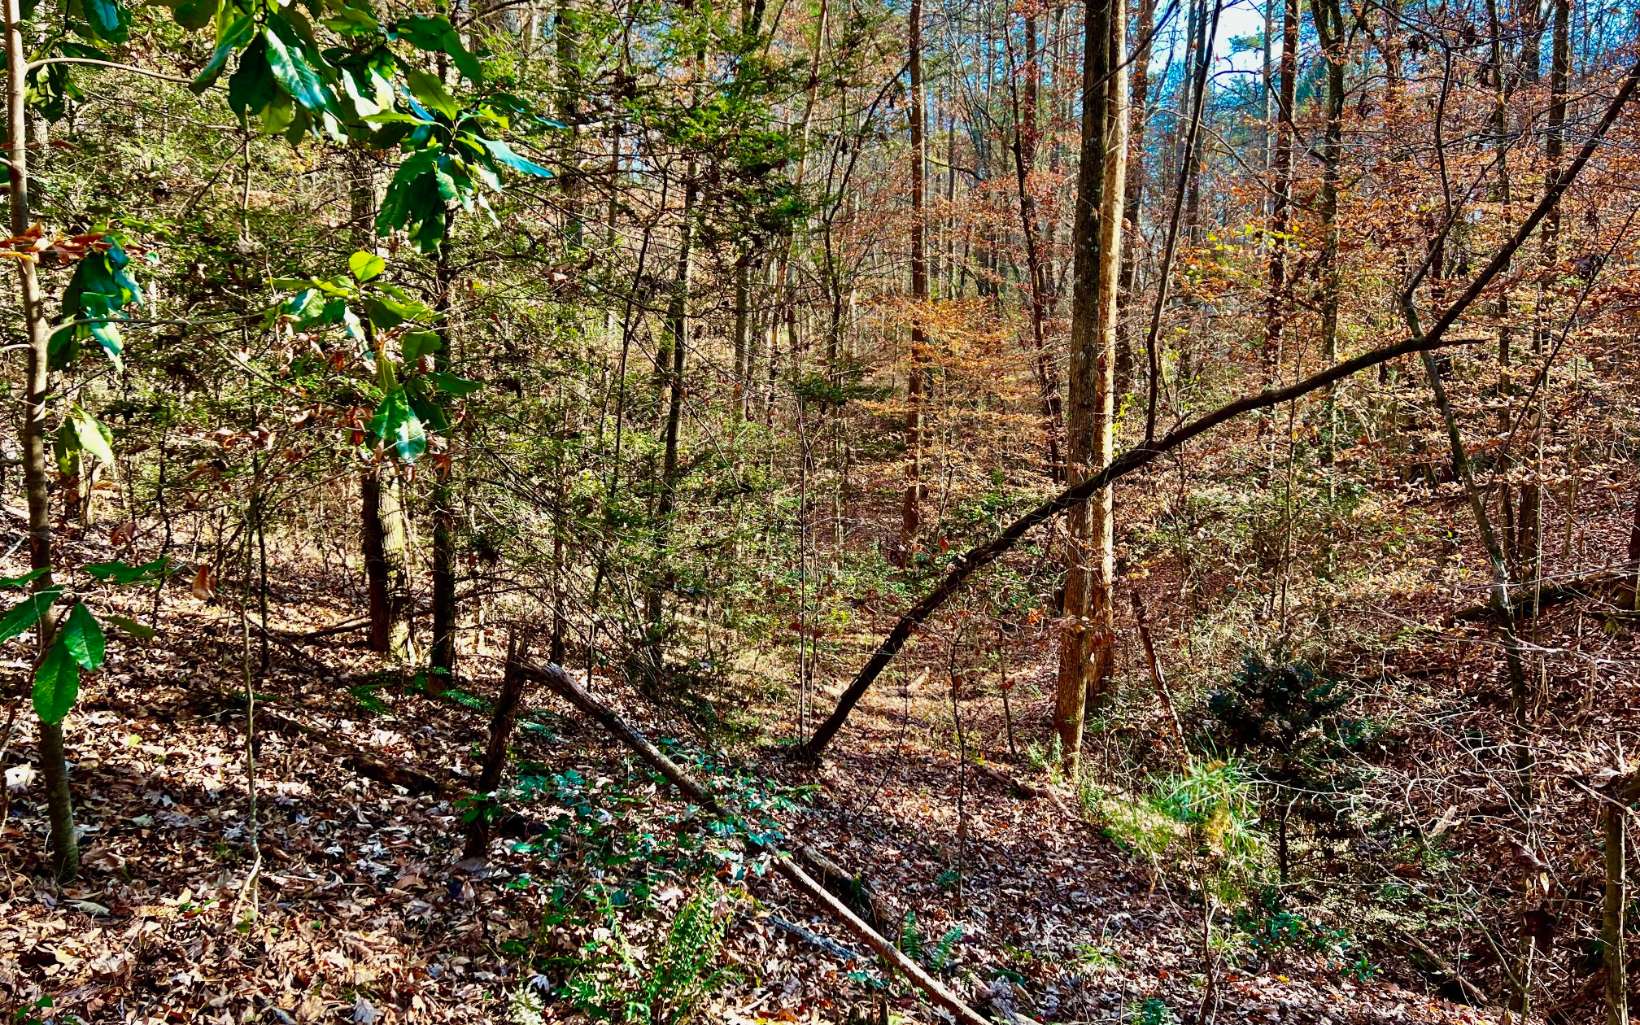 WELCOME HOME!! This just may be the perfect property to build your mountain dream home on. 2.61 acres located on two wooded lots. It also borders a small creek and a pond. All paved access and end of road privacy. Still Waters is a small and established community located just 10 minutes from Ellijay and located at the foothills of the Cohutta Mountains.